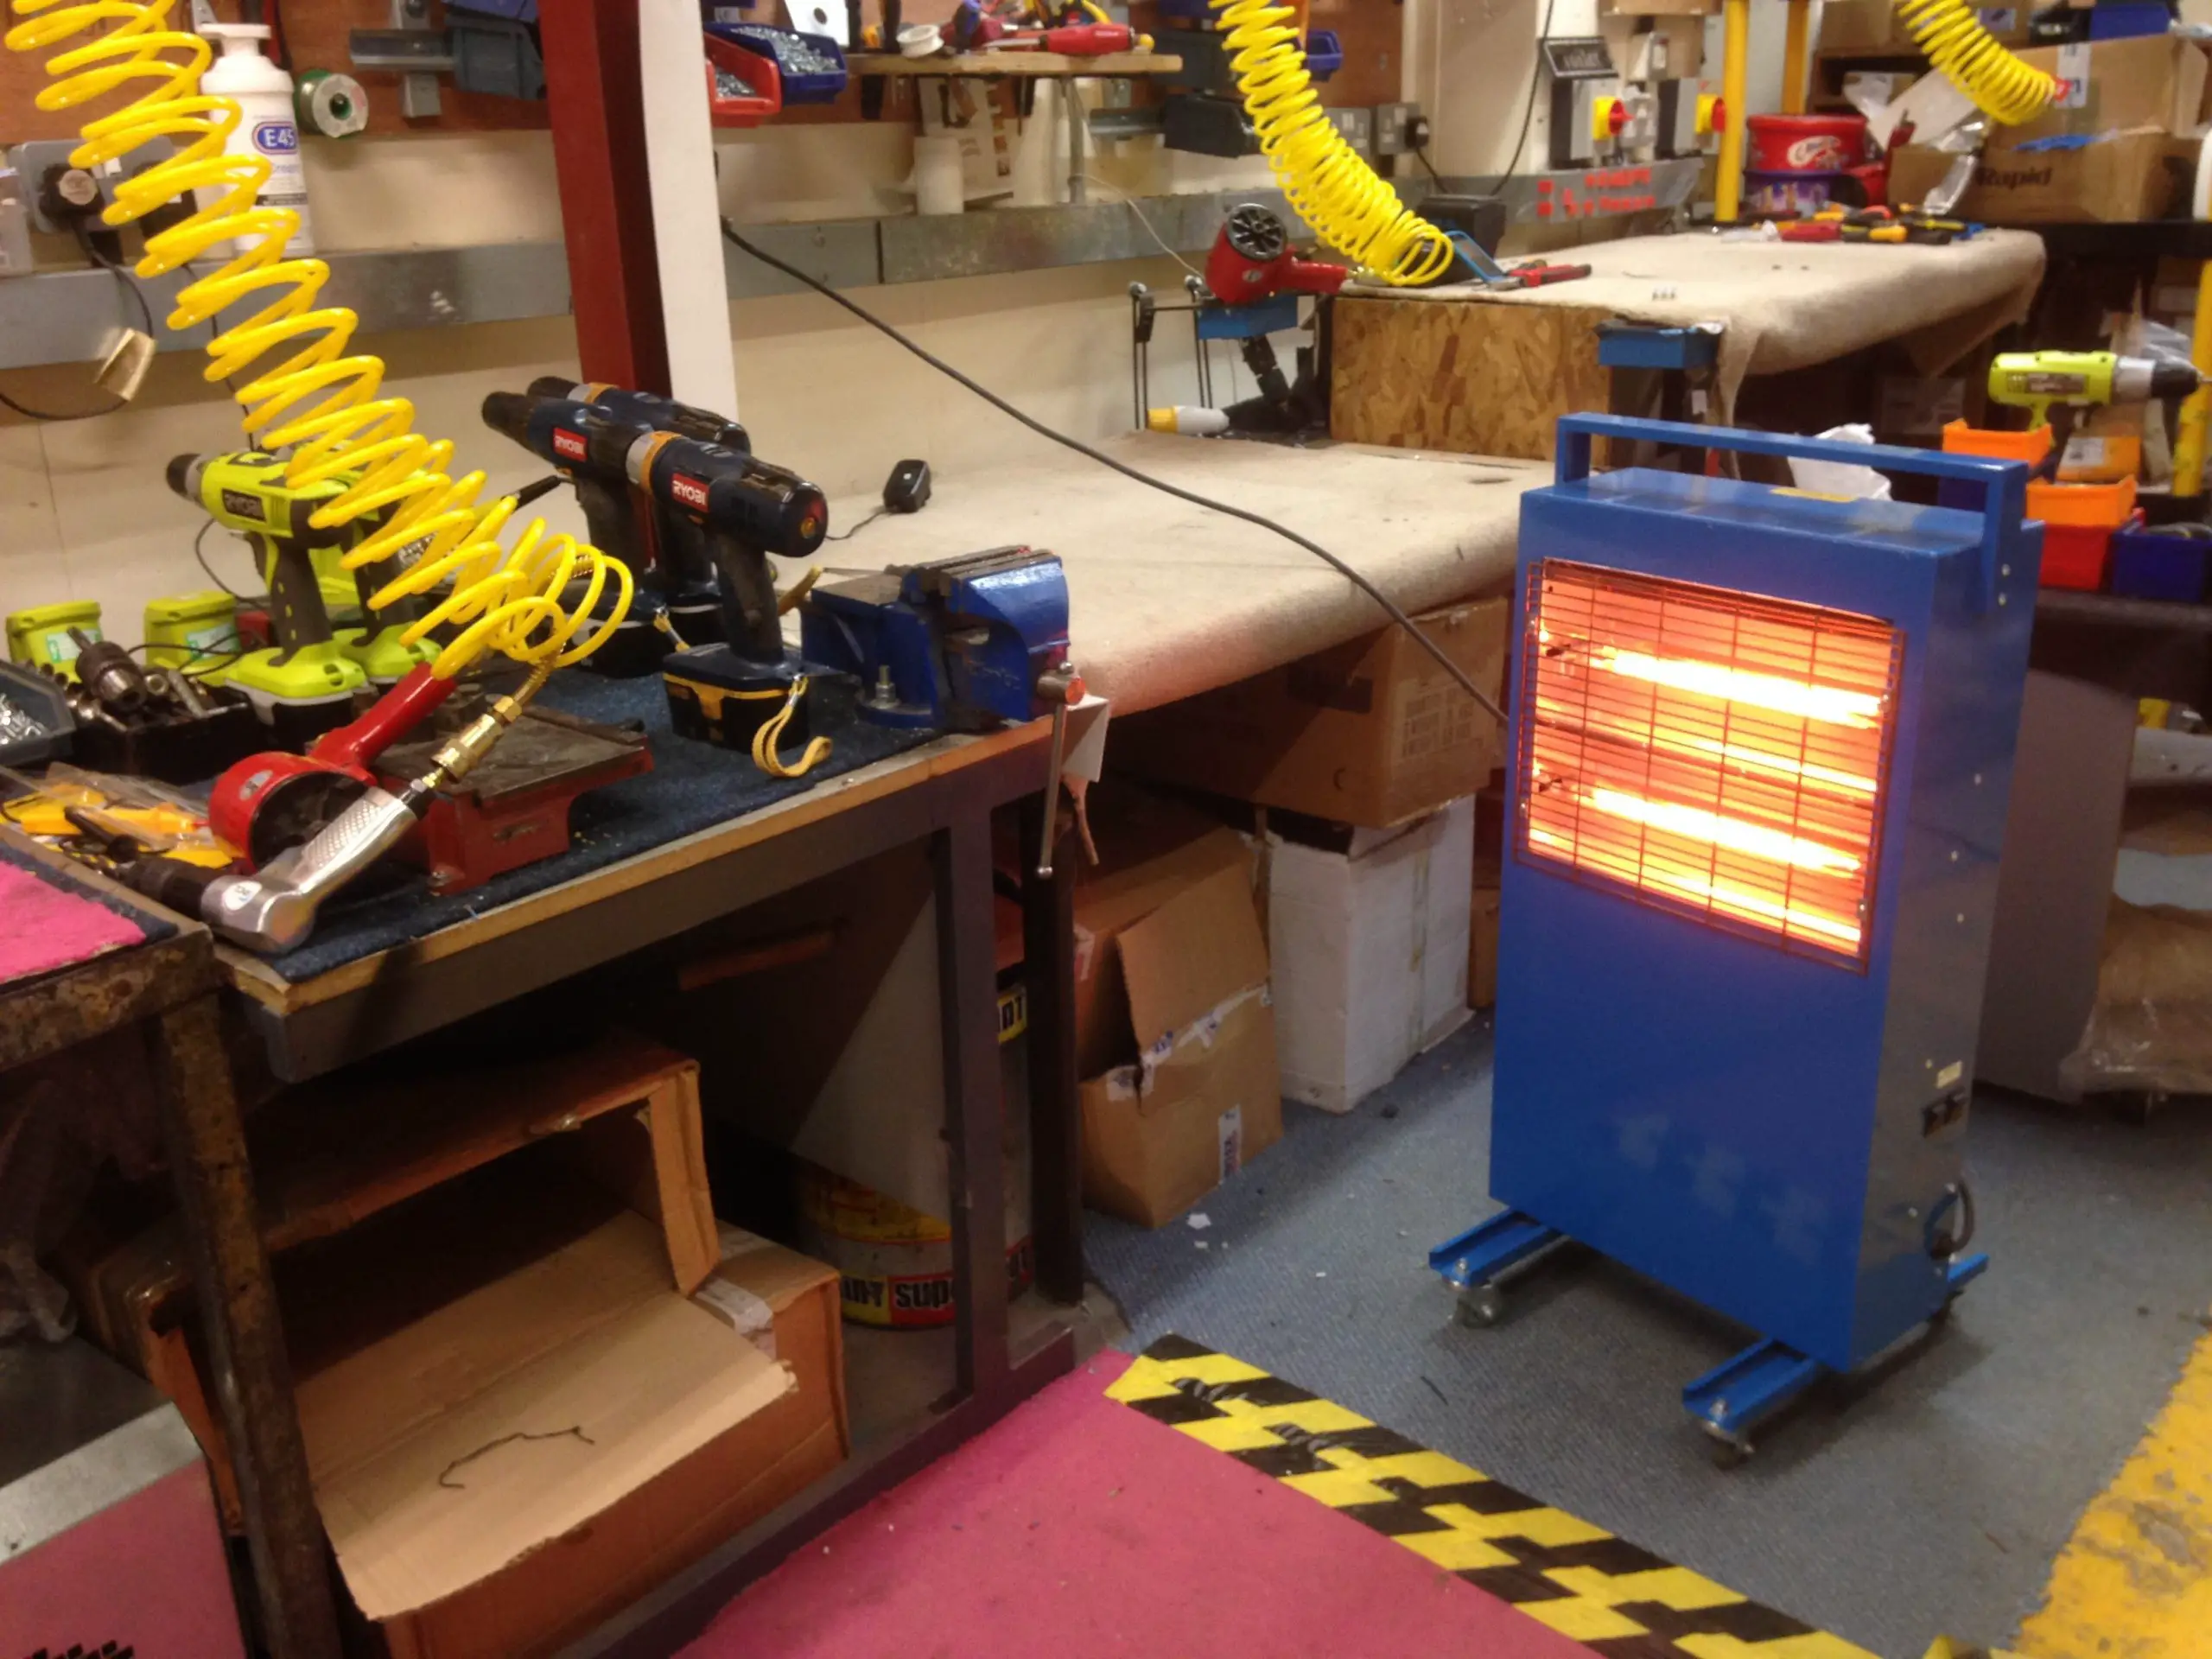 How To Heat A Workshop In The Winter (Without Burning It Down)